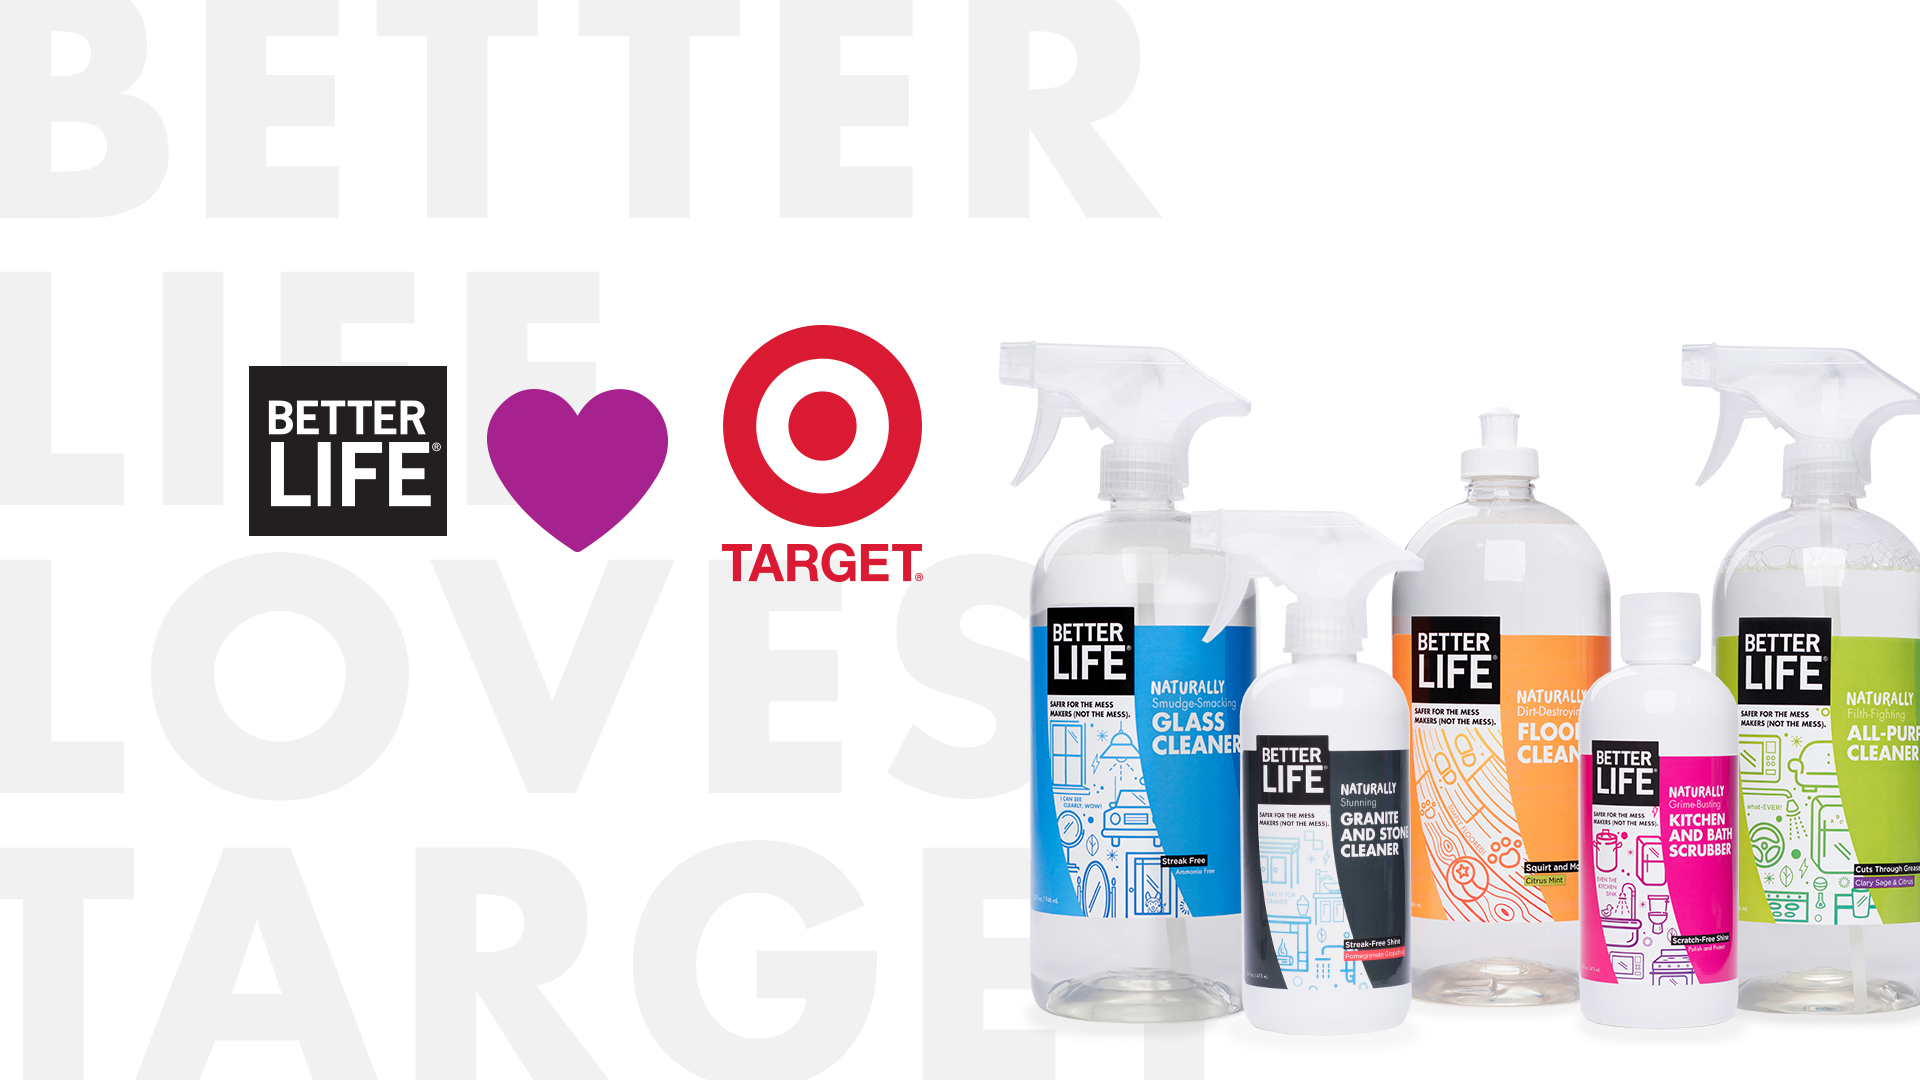 Better Life at Target